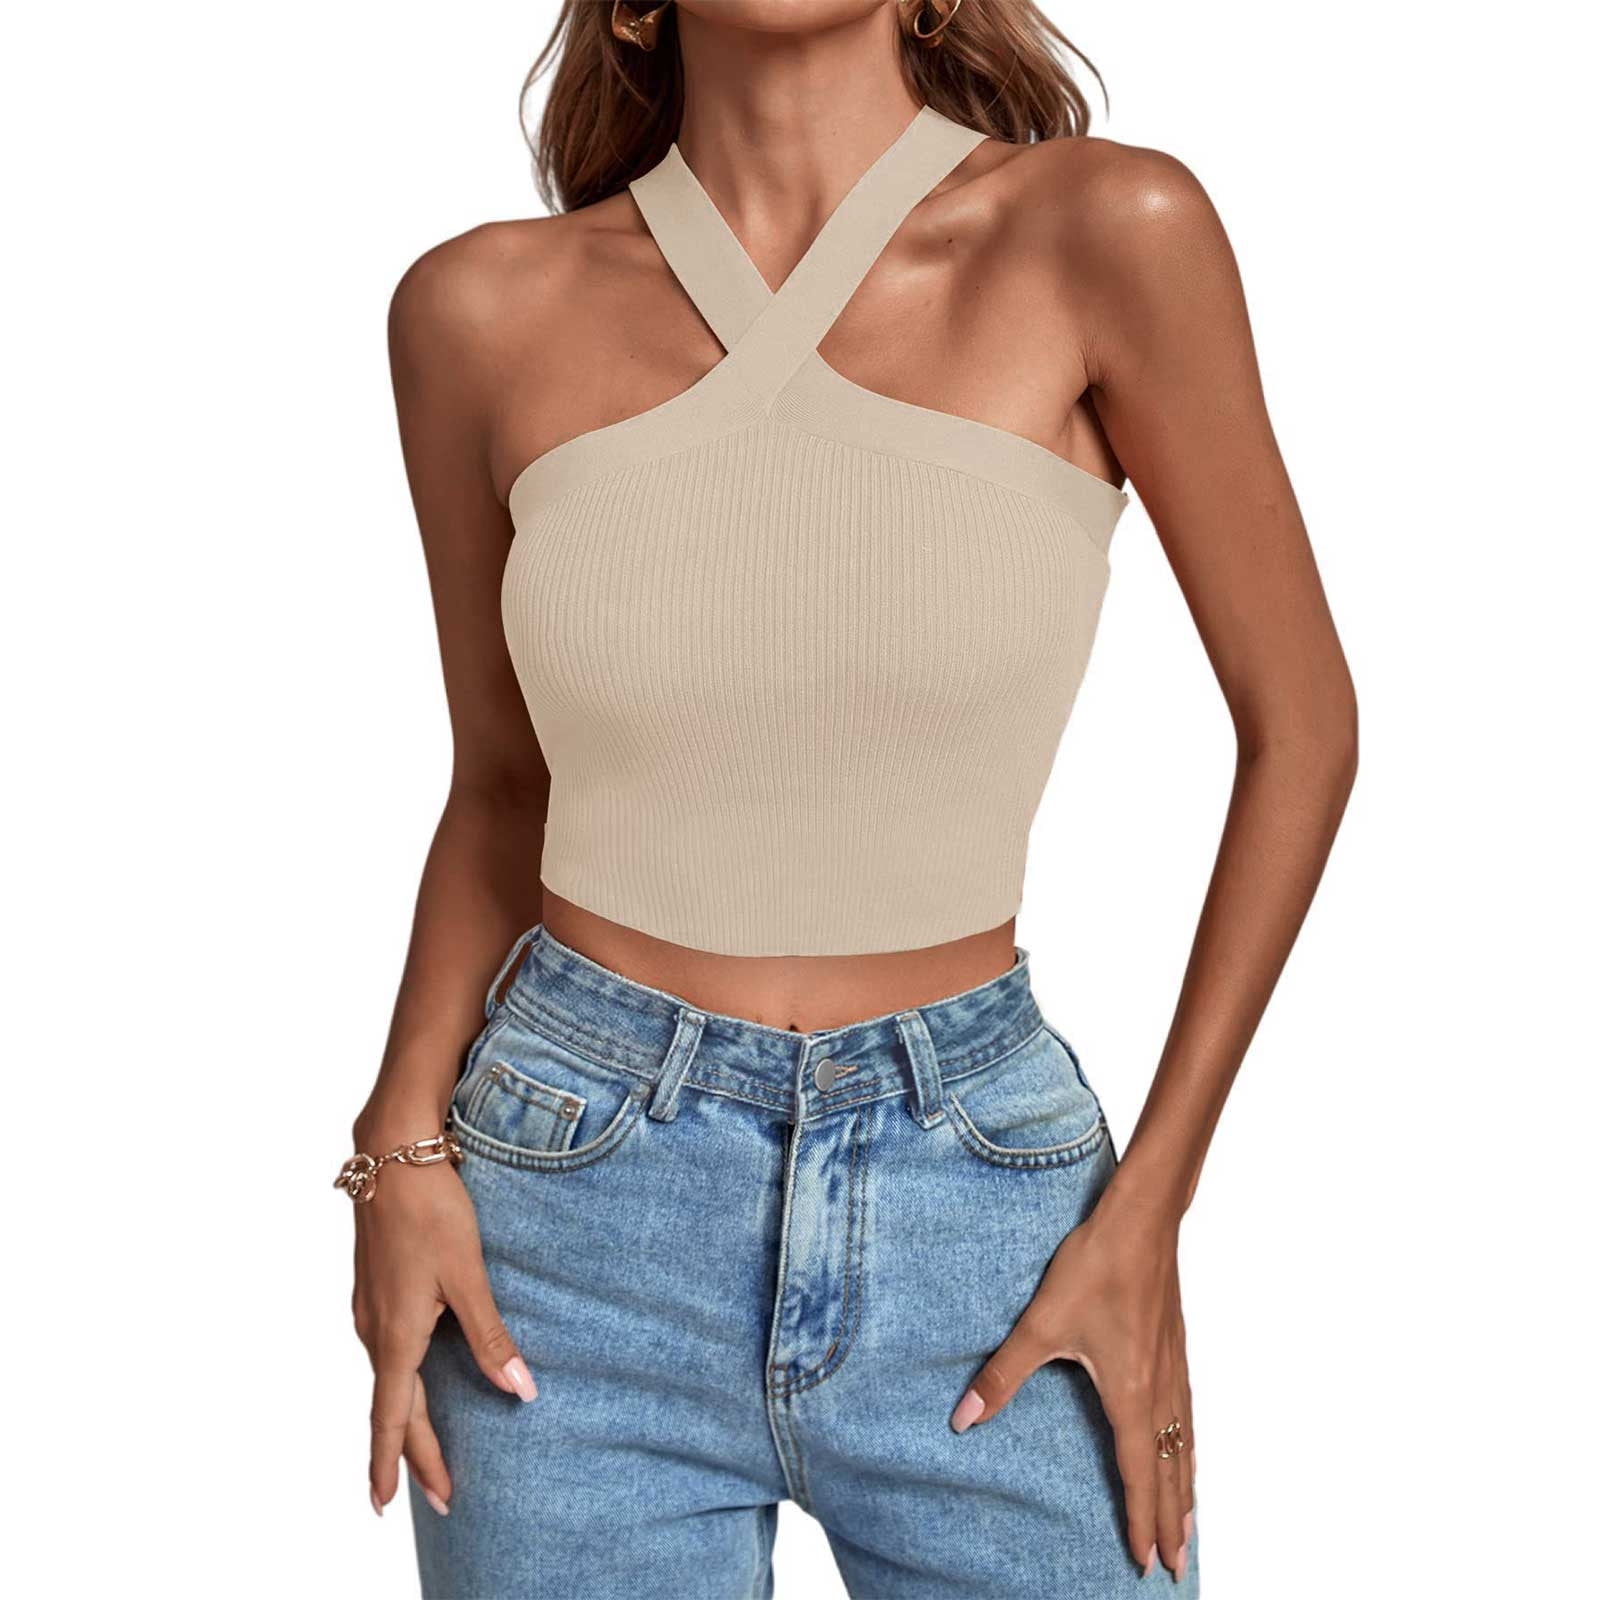 Women's Sexy Camisole Jumpsuit Top Backless Cross Straps Cami T